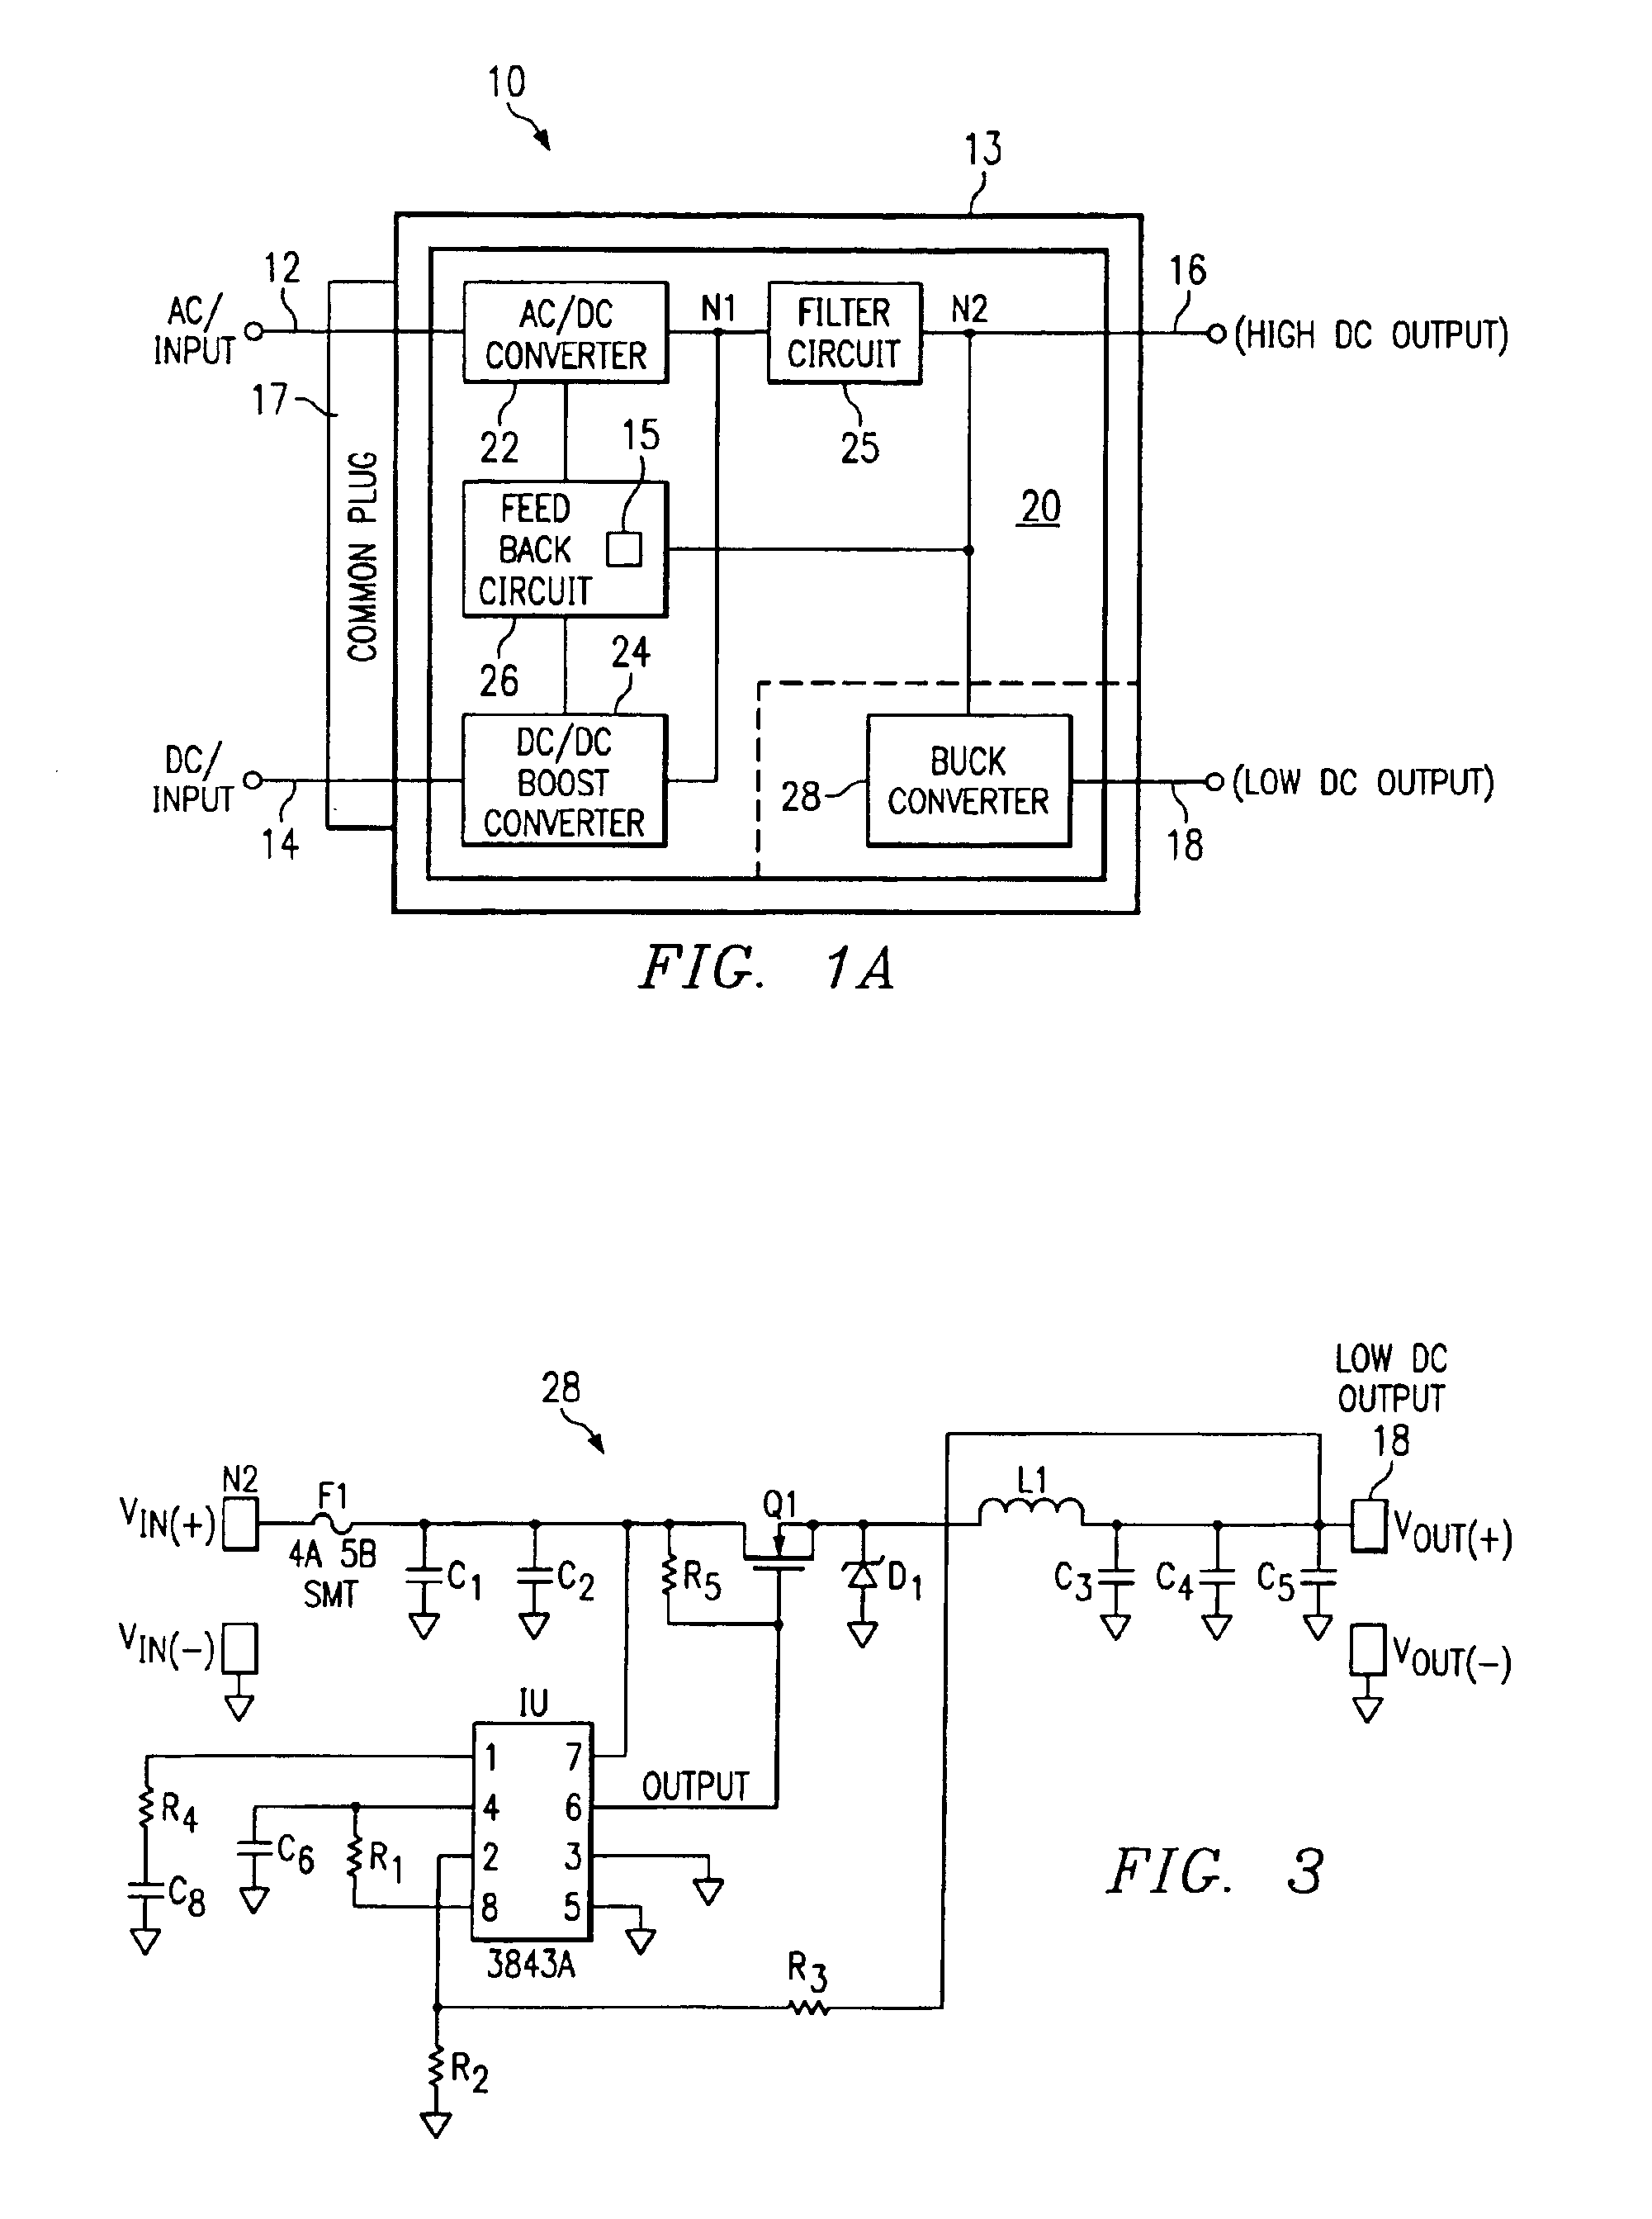 Dual input AC and DC power supply having a programmable DC output utilizing a modular programmable feedback loop